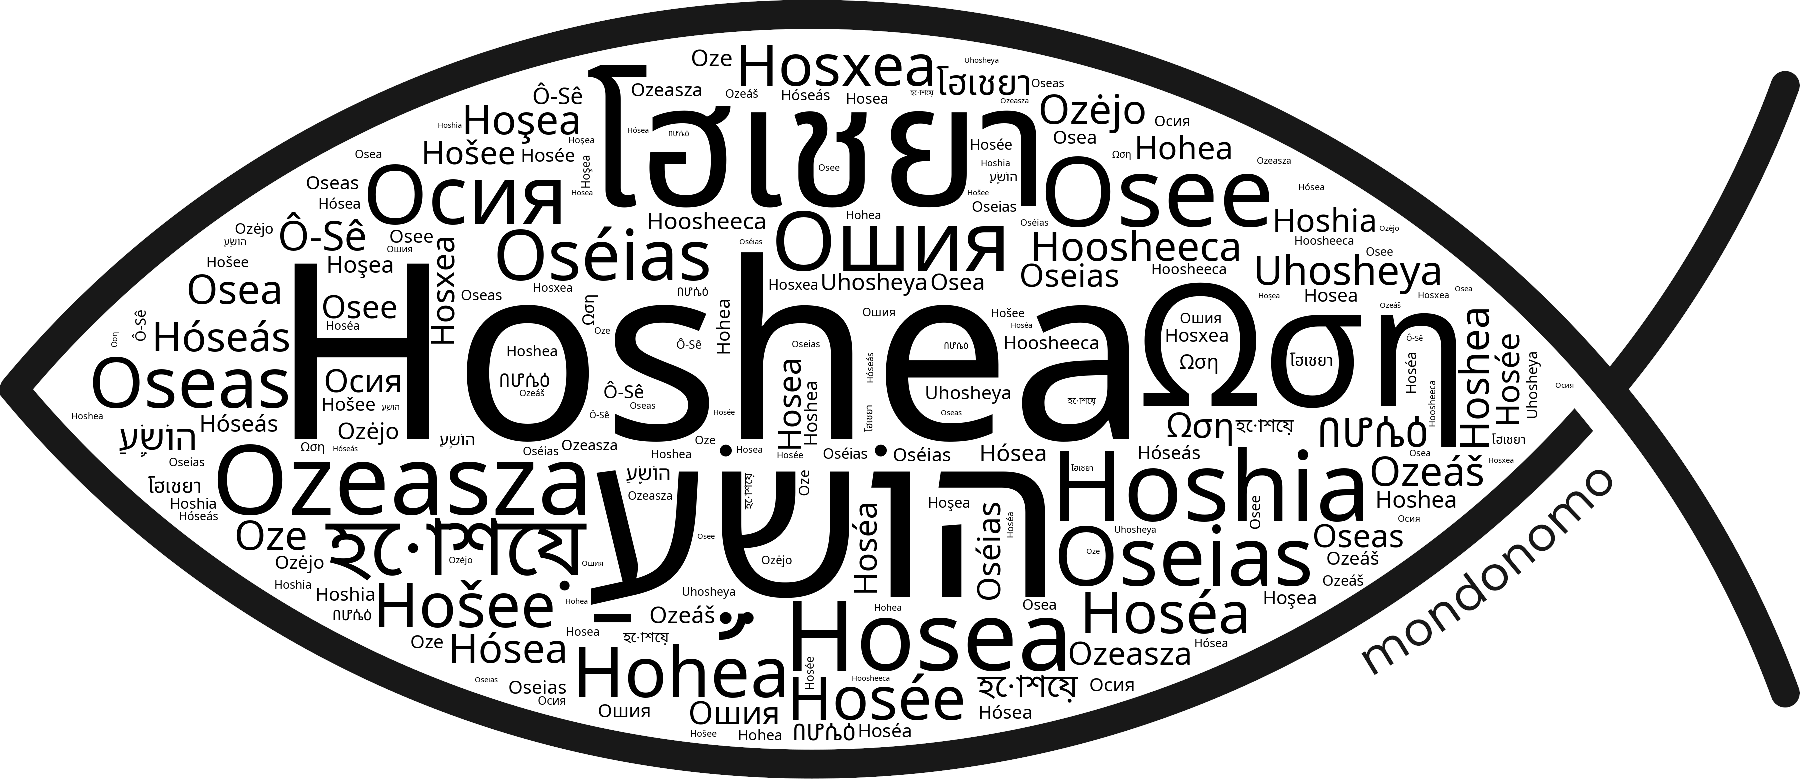 Name Hoshea in the world's Bibles